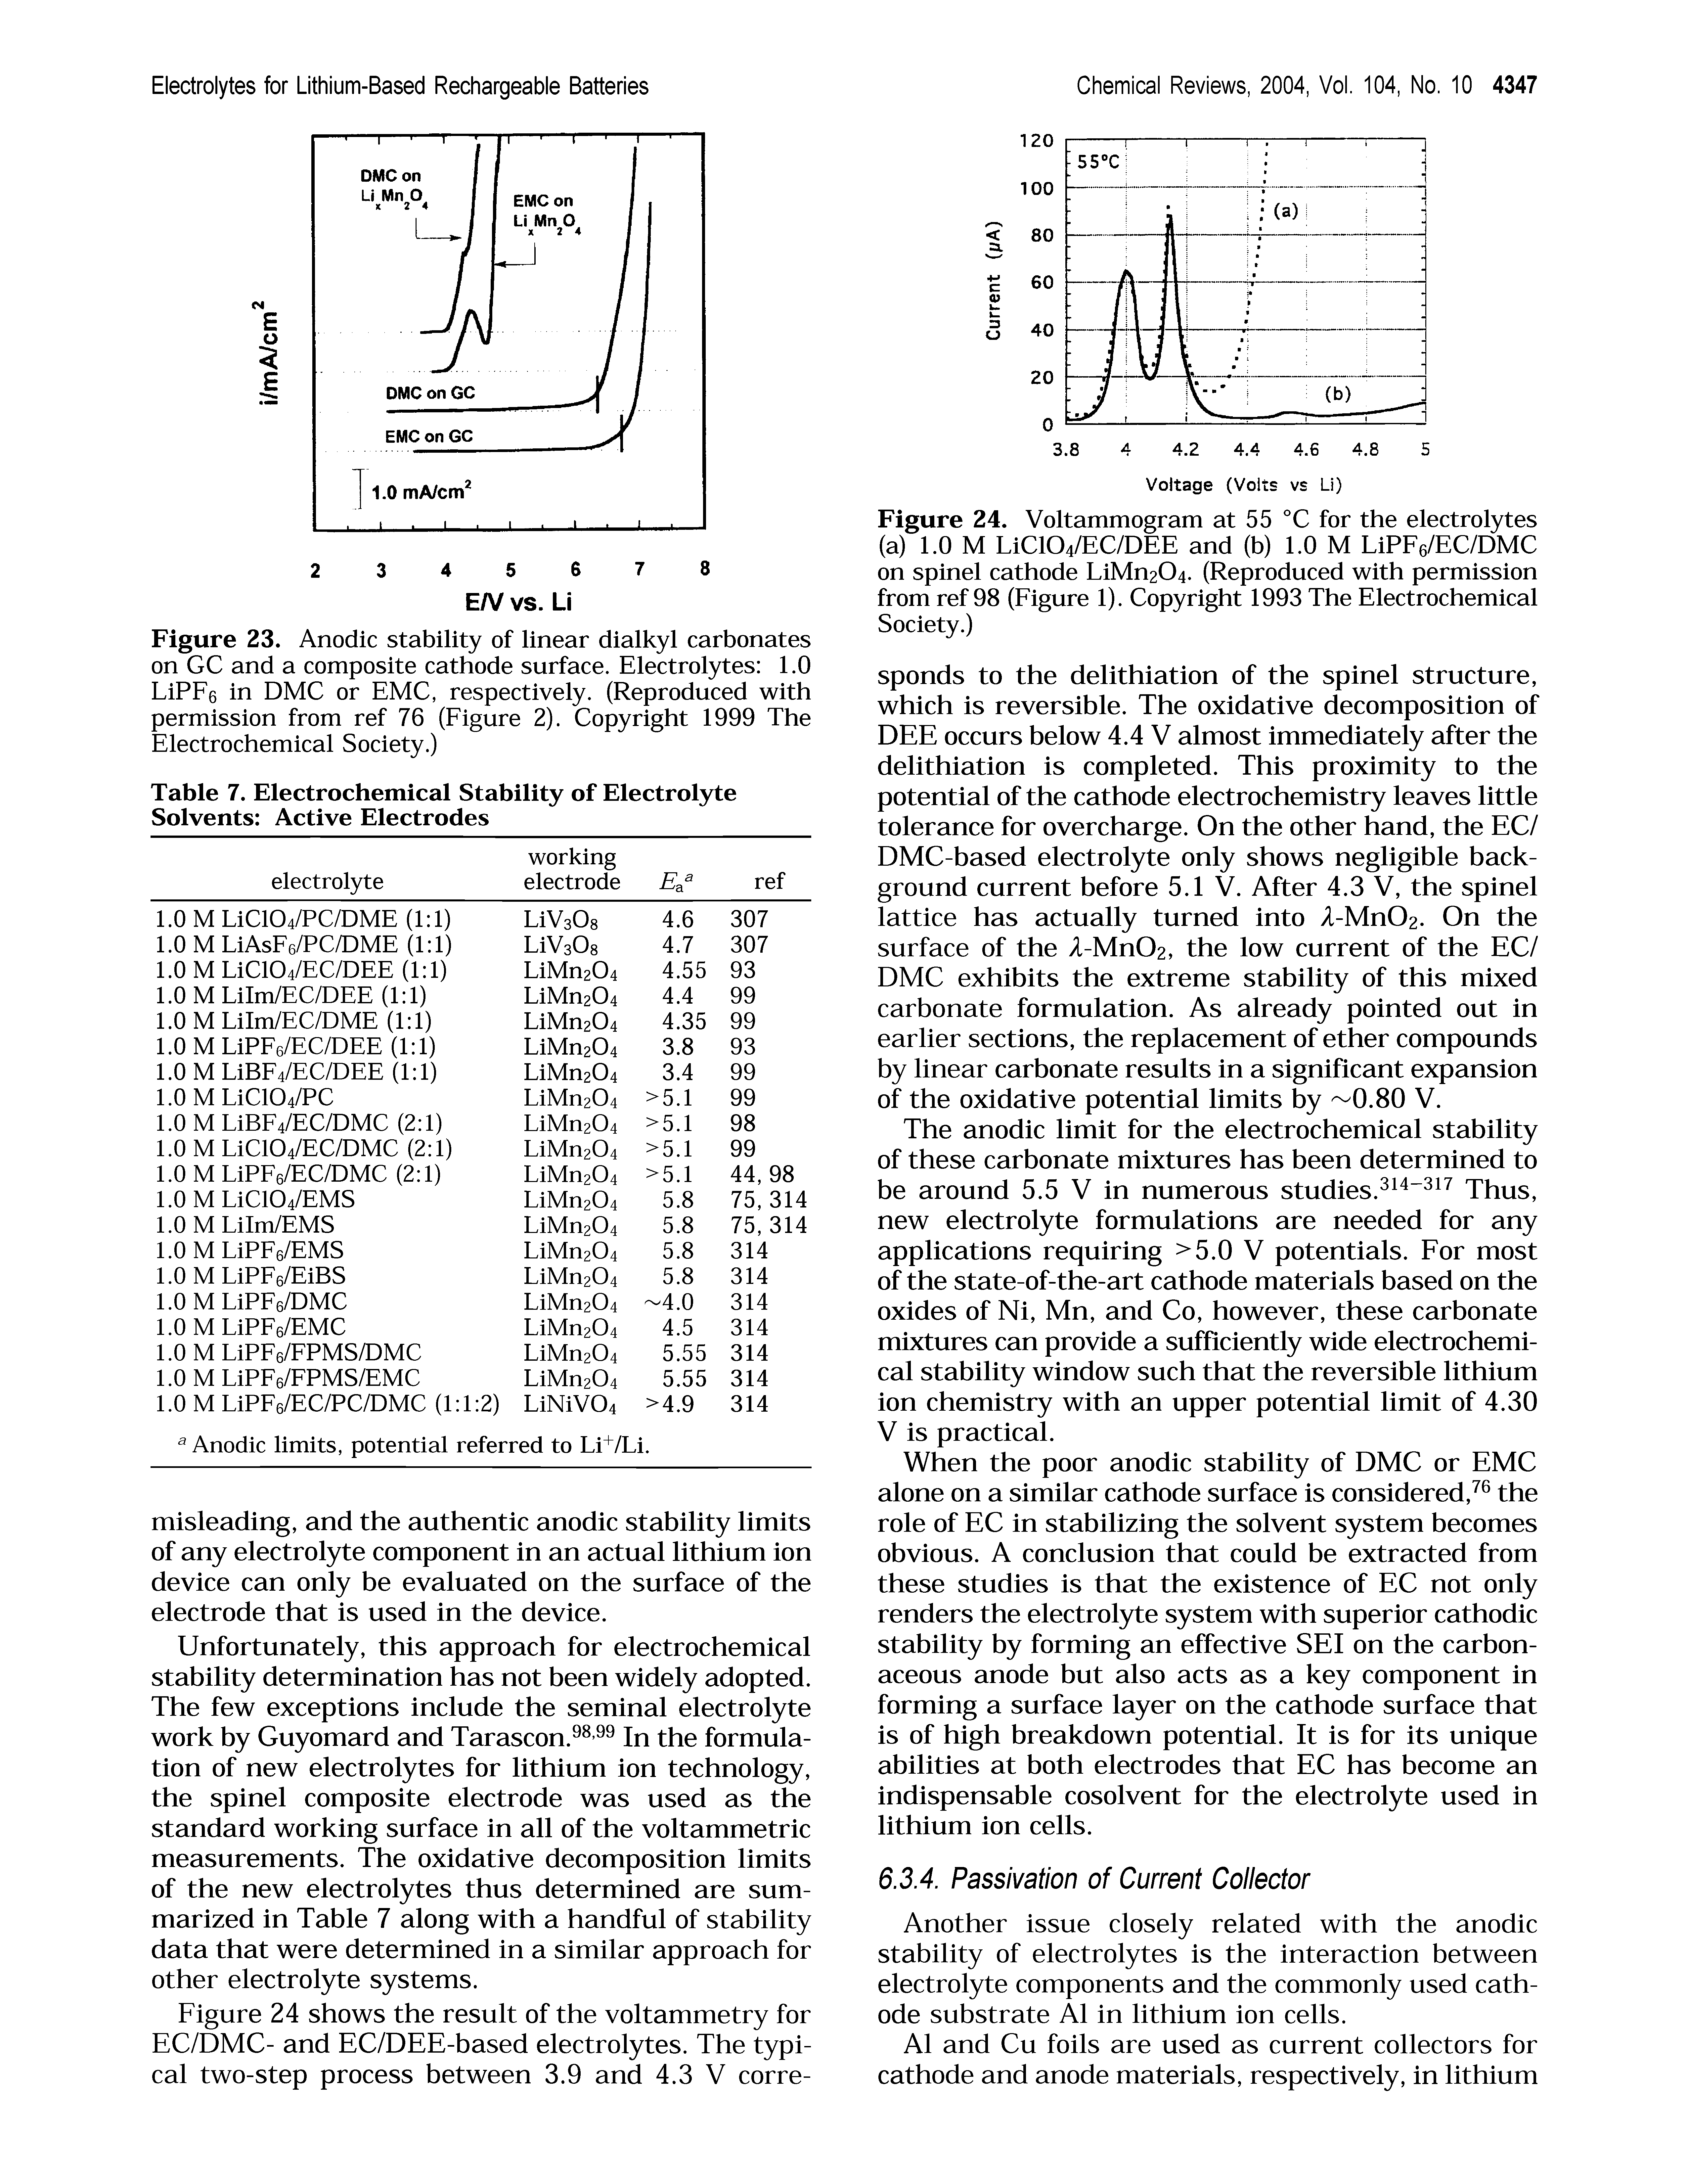 Figure 23. Anodic stability of linear dialkyl carbonates on GC and a composite cathode surface. Electrolytes 1.0 LiPFe in DMC or EMC, respectively. (Reproduced with permission from ref 76 (Figure 2). Copyright 1999 The Electrochemical Society.)...